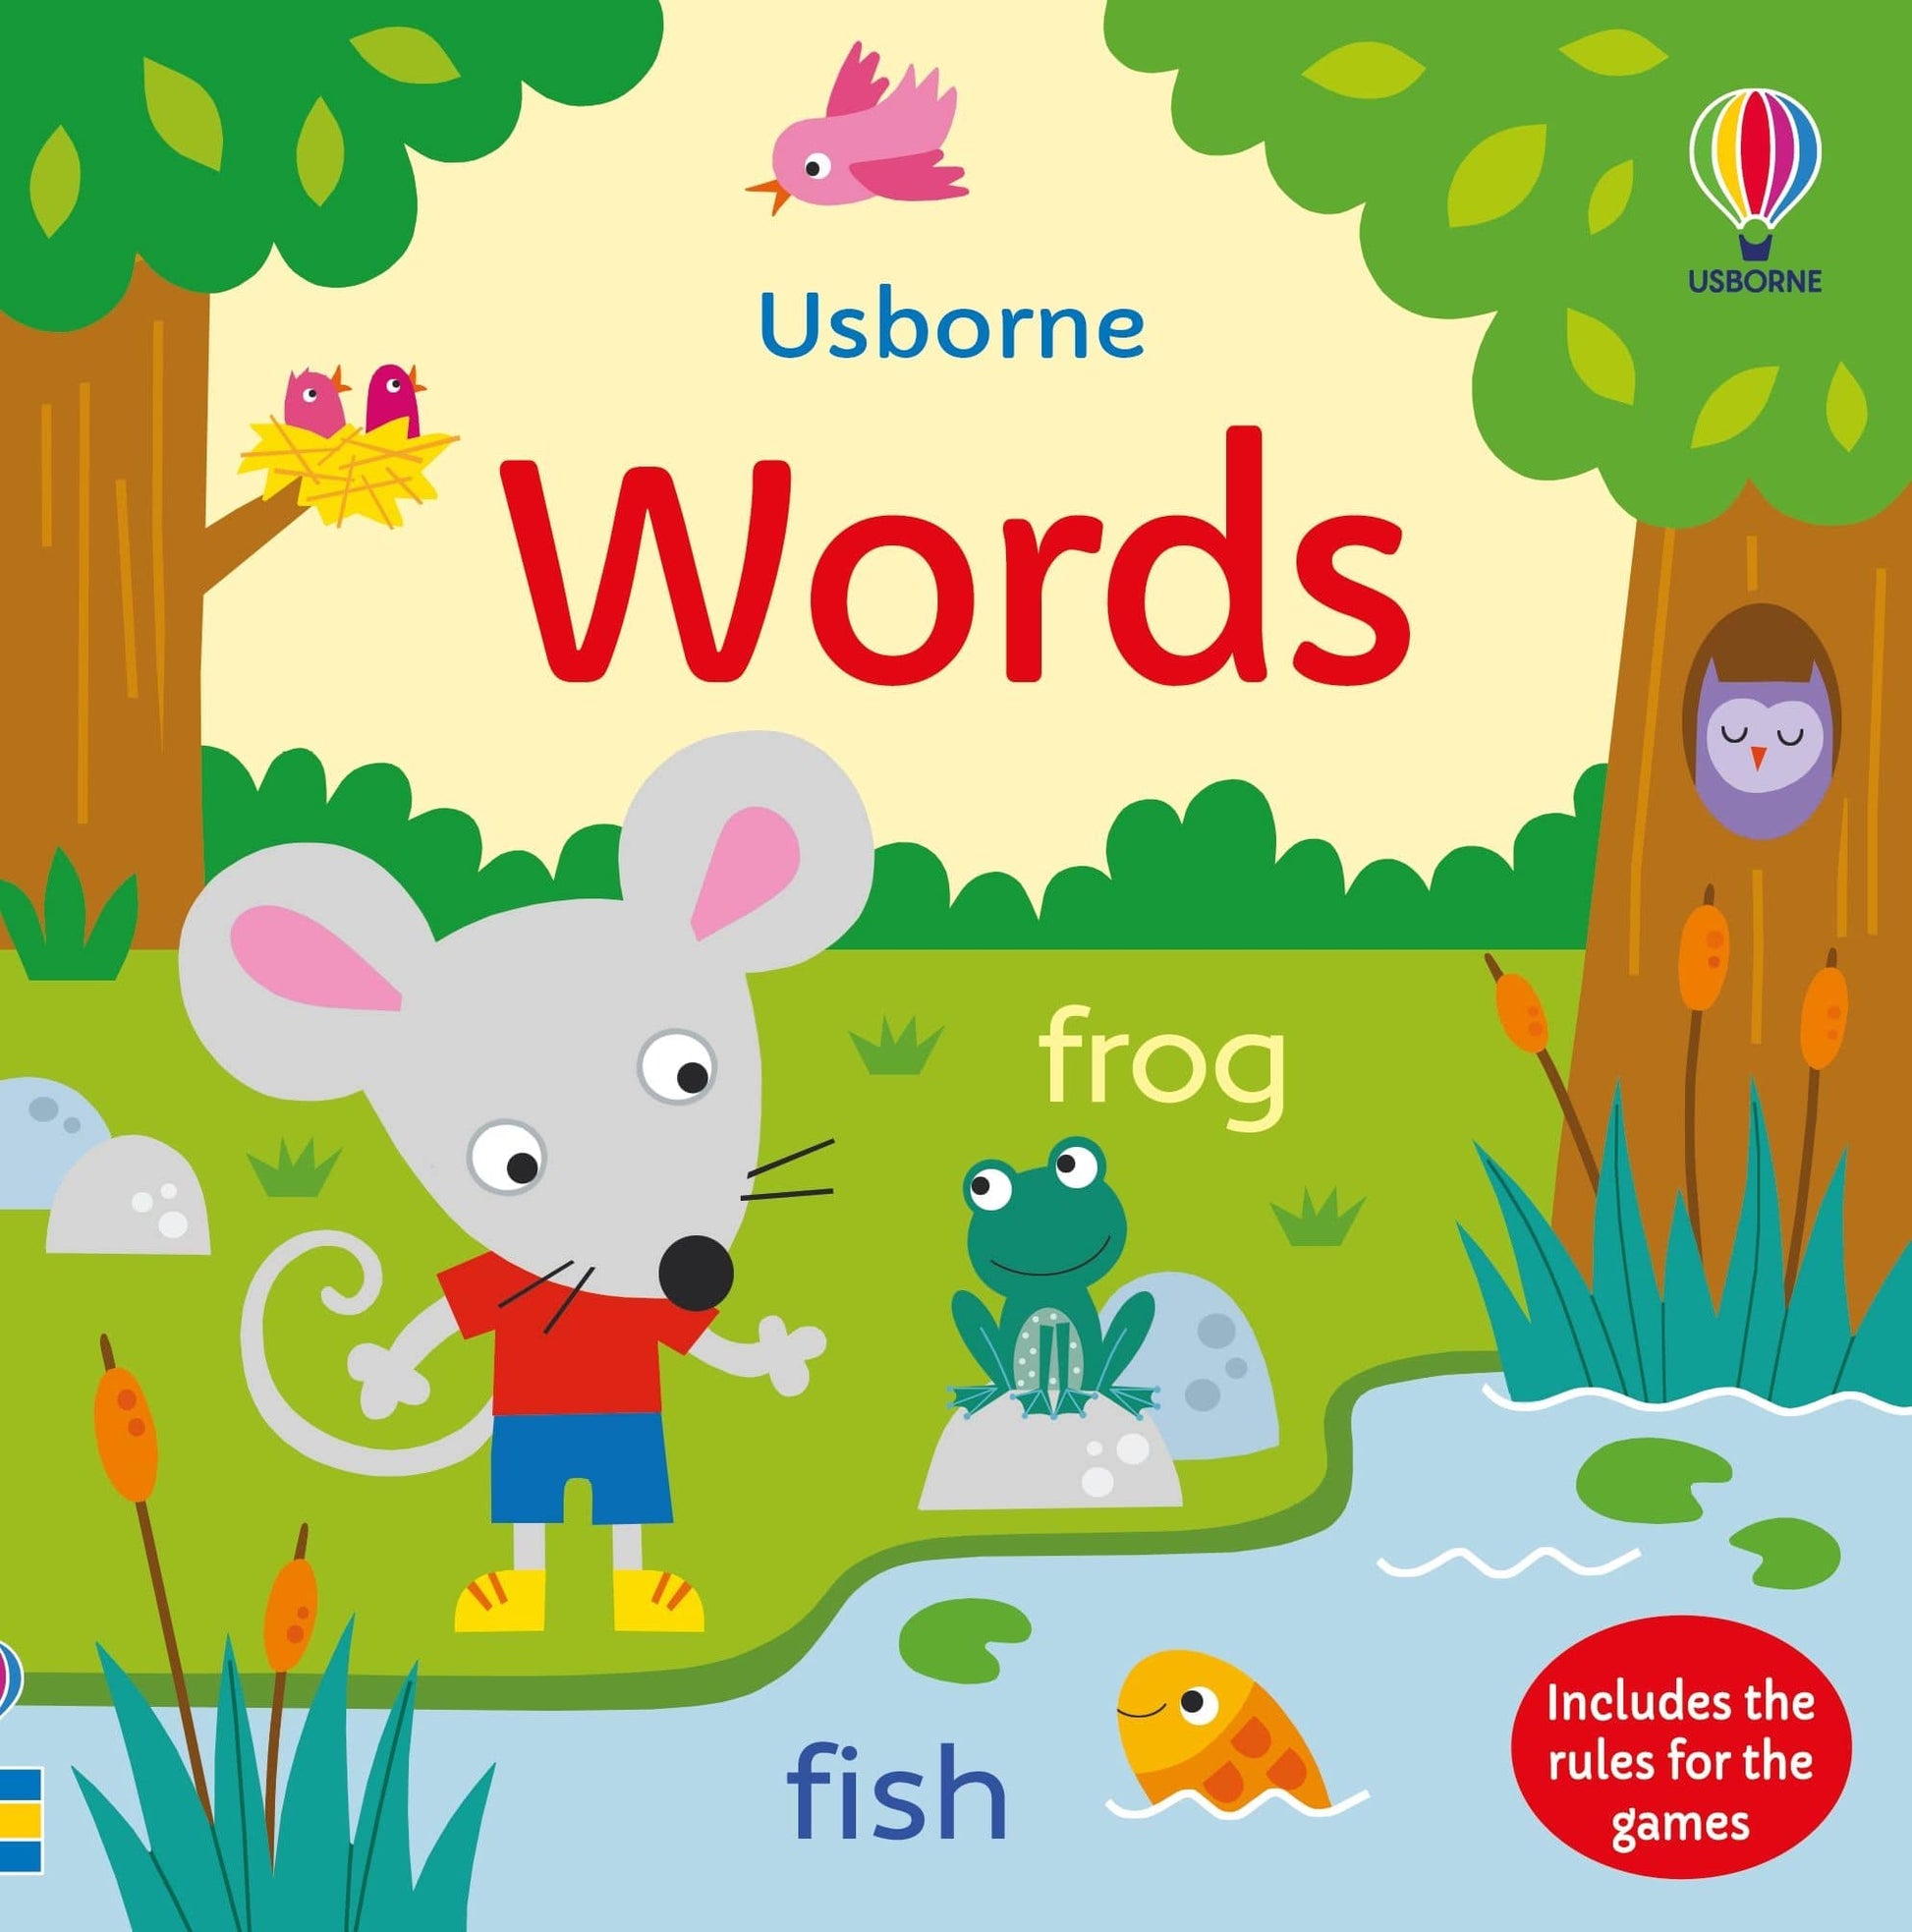 Usborne Words Matching Games and Book Kate Nolan  Illustrated by Jayne Schofield